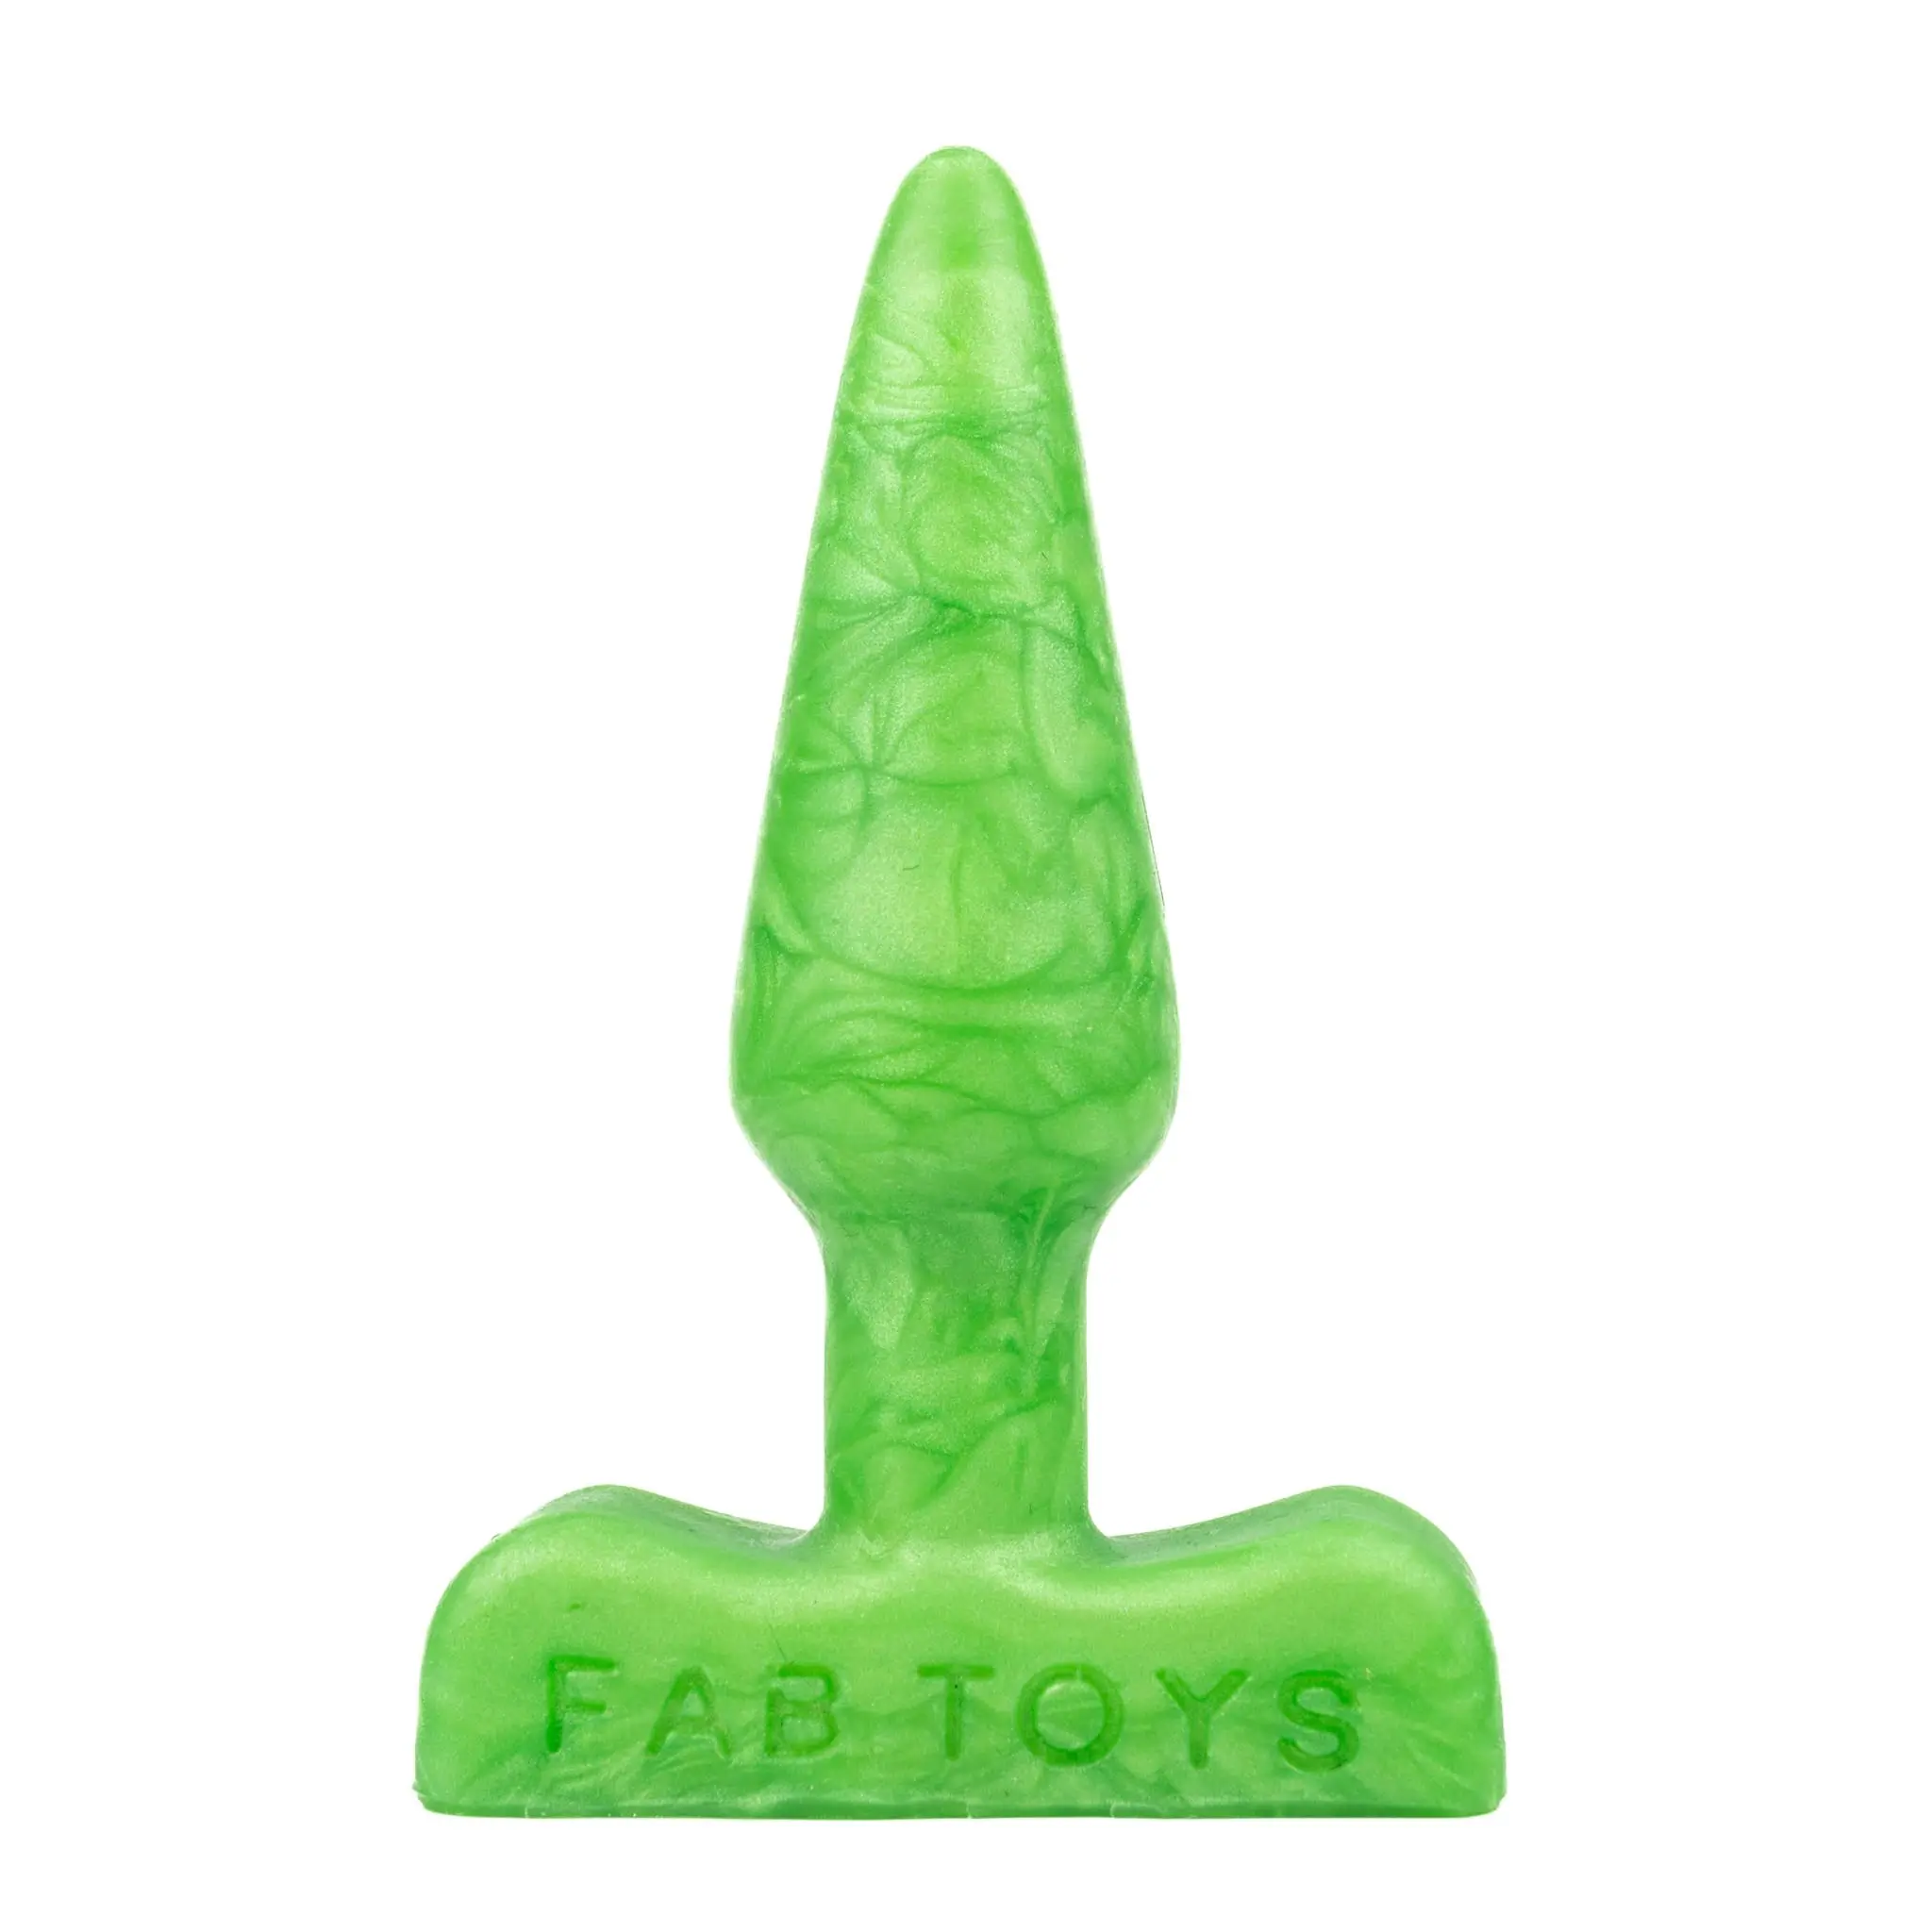 FAB.toys Classic Butt Plug silicone toy